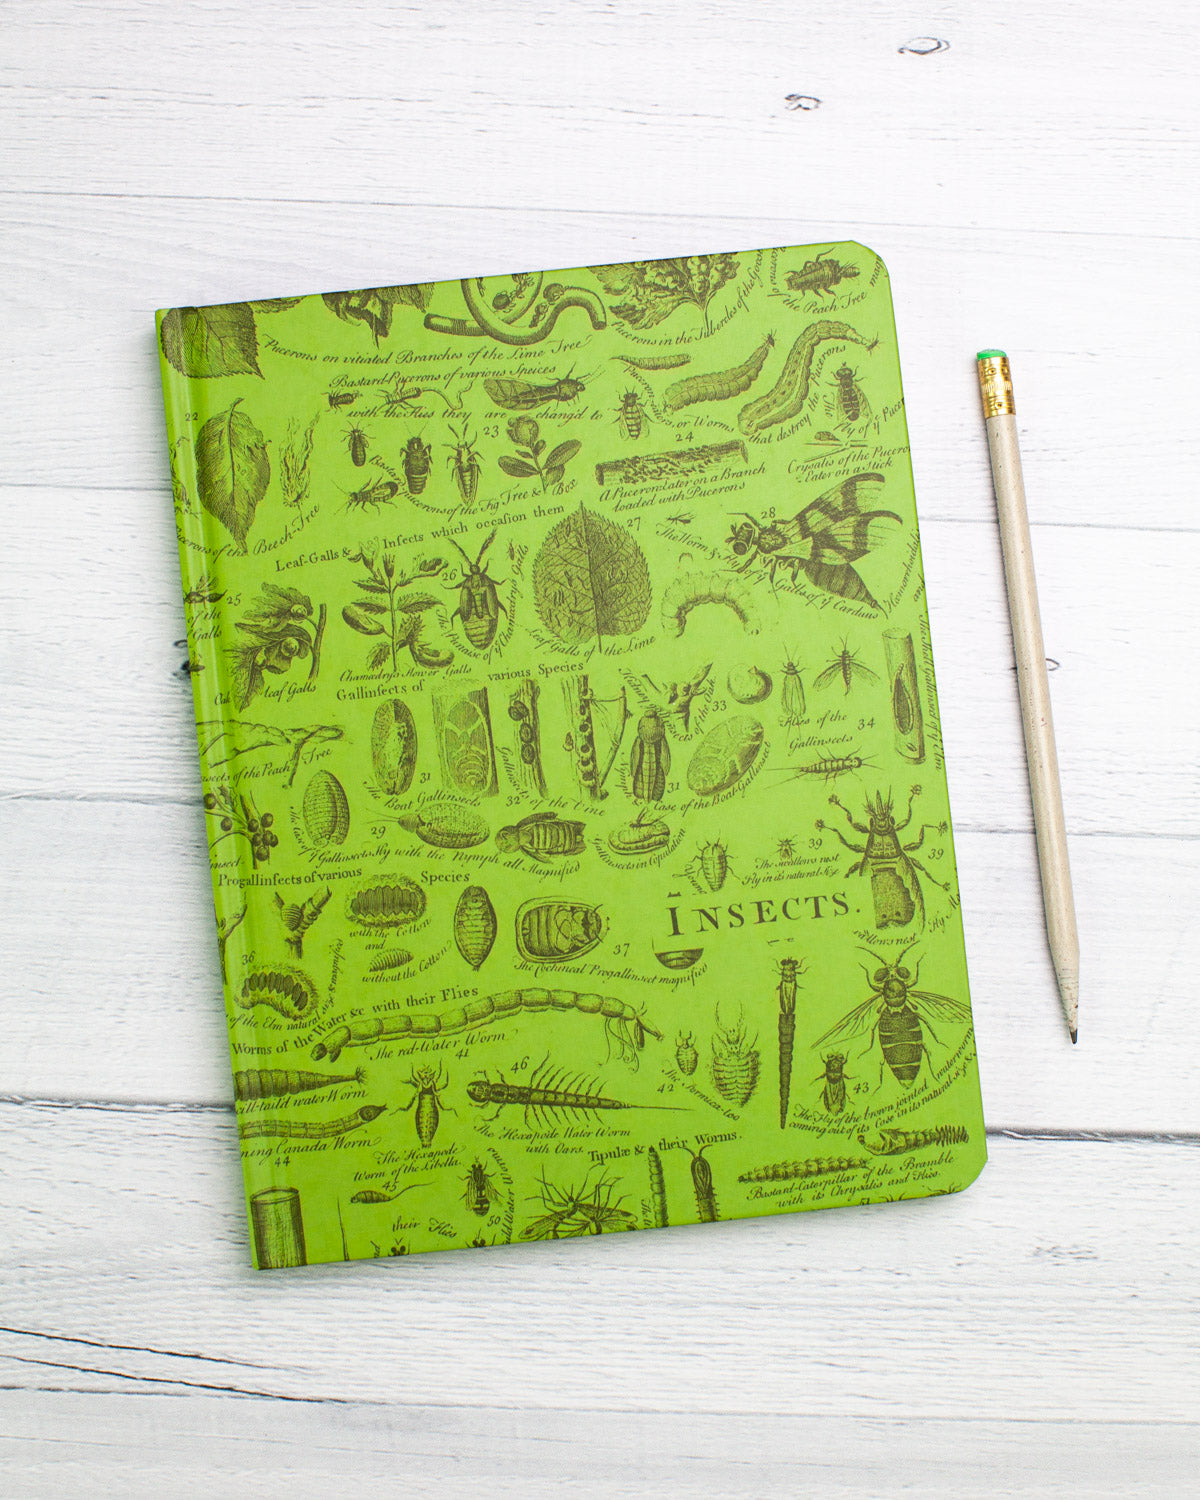 Insects hardcover recycled notebook by Cognitive Surplus